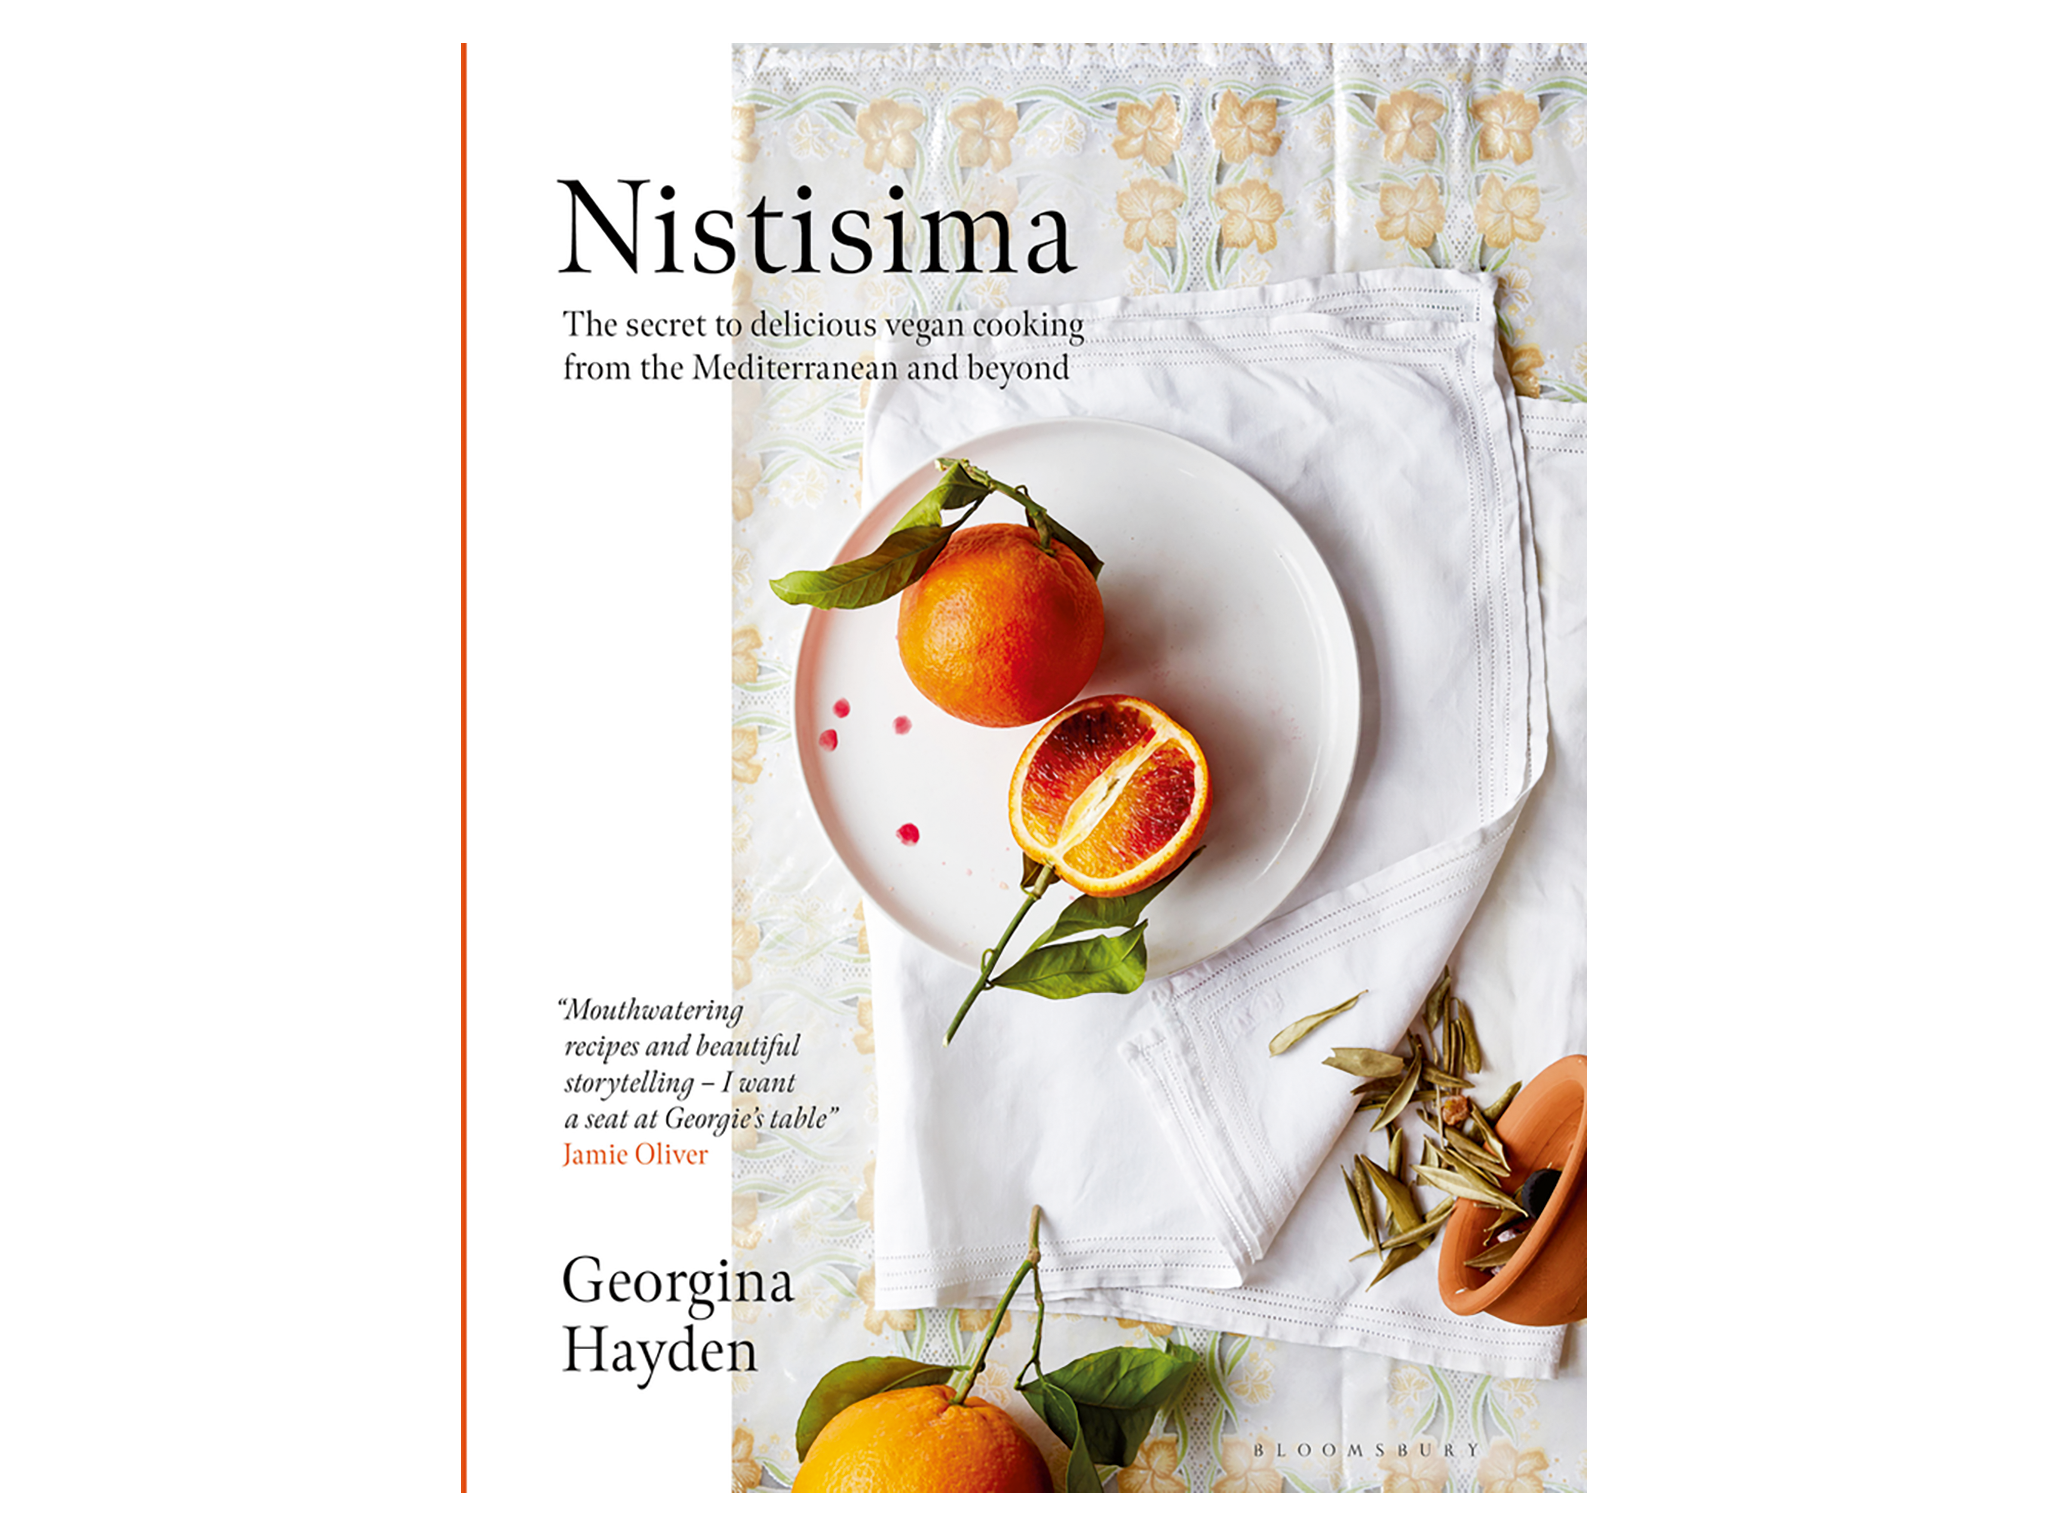 ‘Nistisima’ by Georgina Hayden, published by Bloomsbury